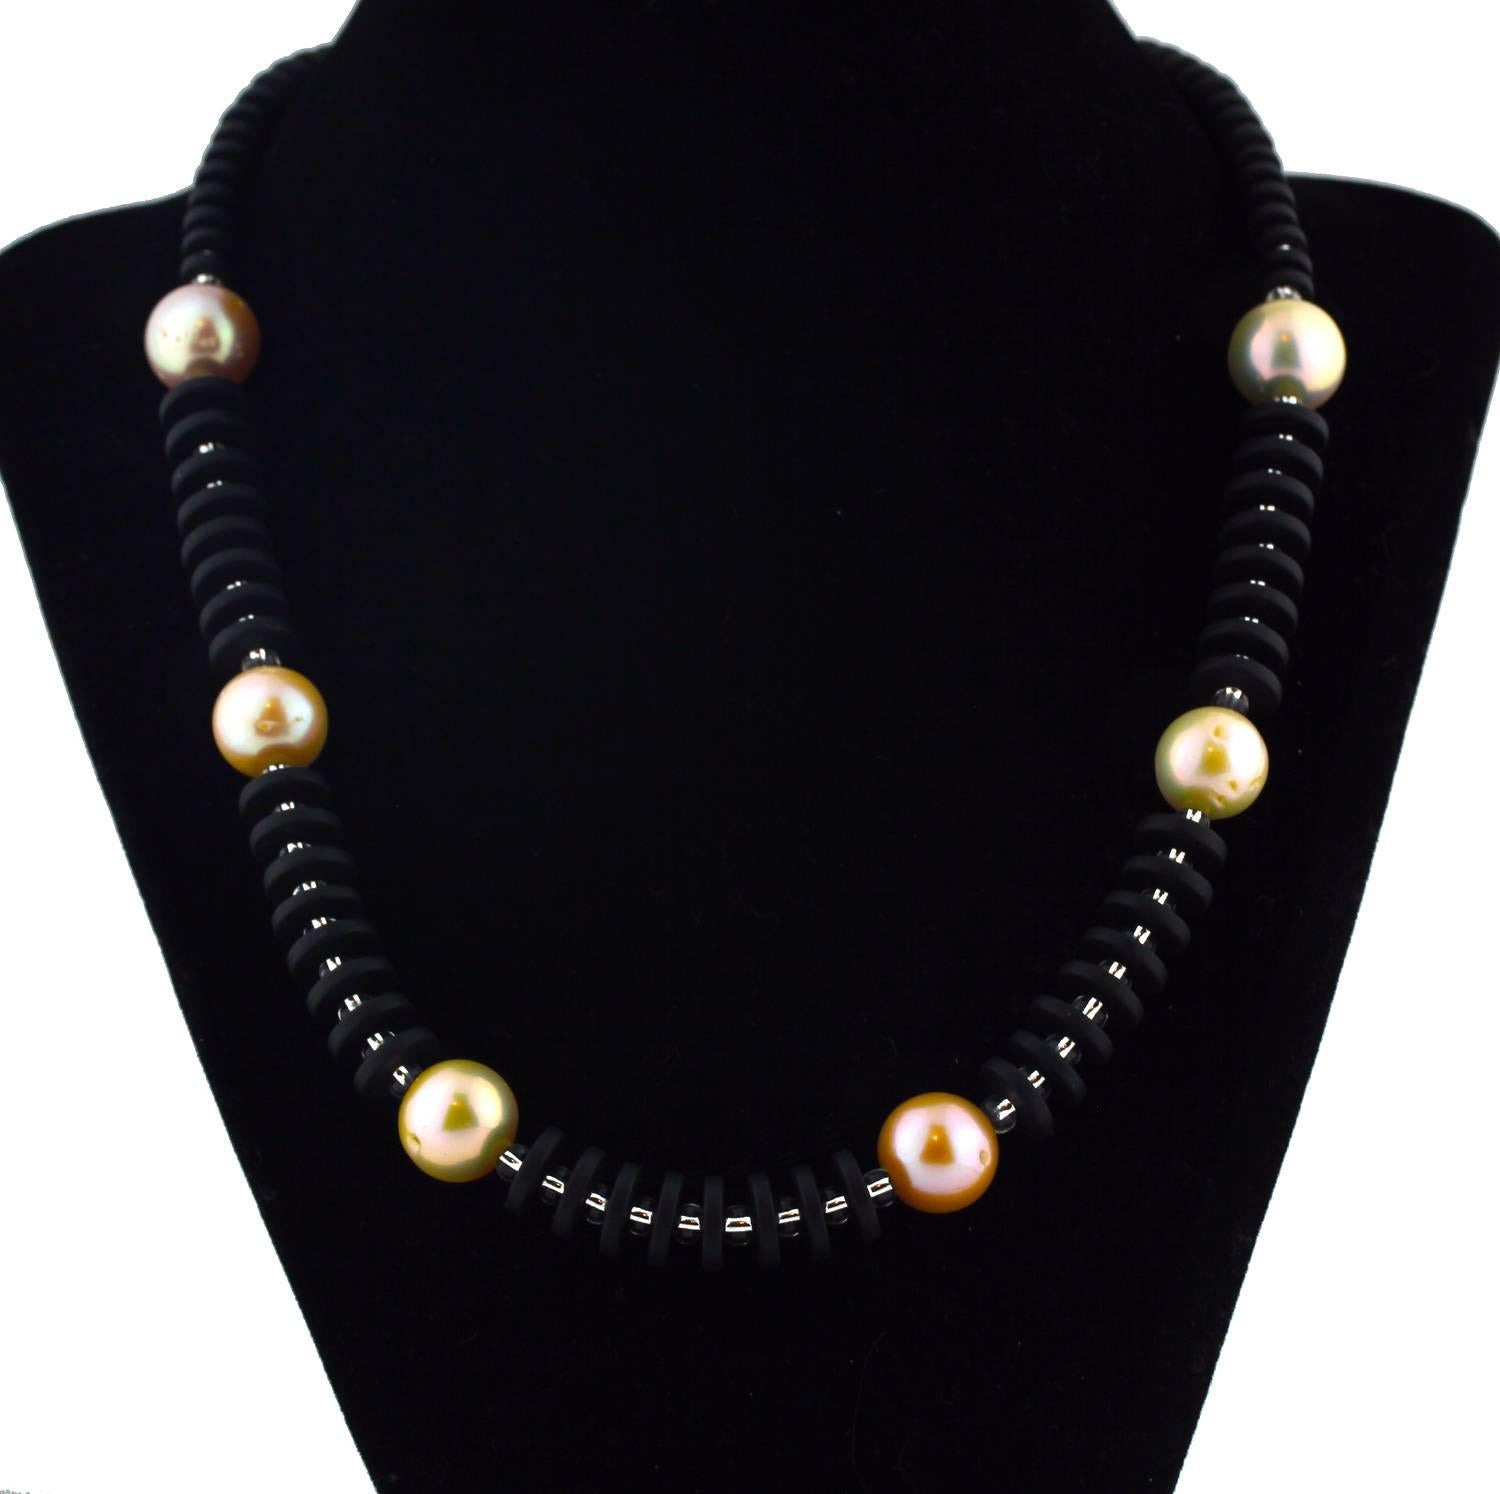 
The sophistication of these unique natural magnificent peachy and light peachy real Pearls enhancing these flat black Onyx rondels with sparkling silver tone crystal accents is super elegant on this handmade necklace.  Size:  approximately 13 mm; 